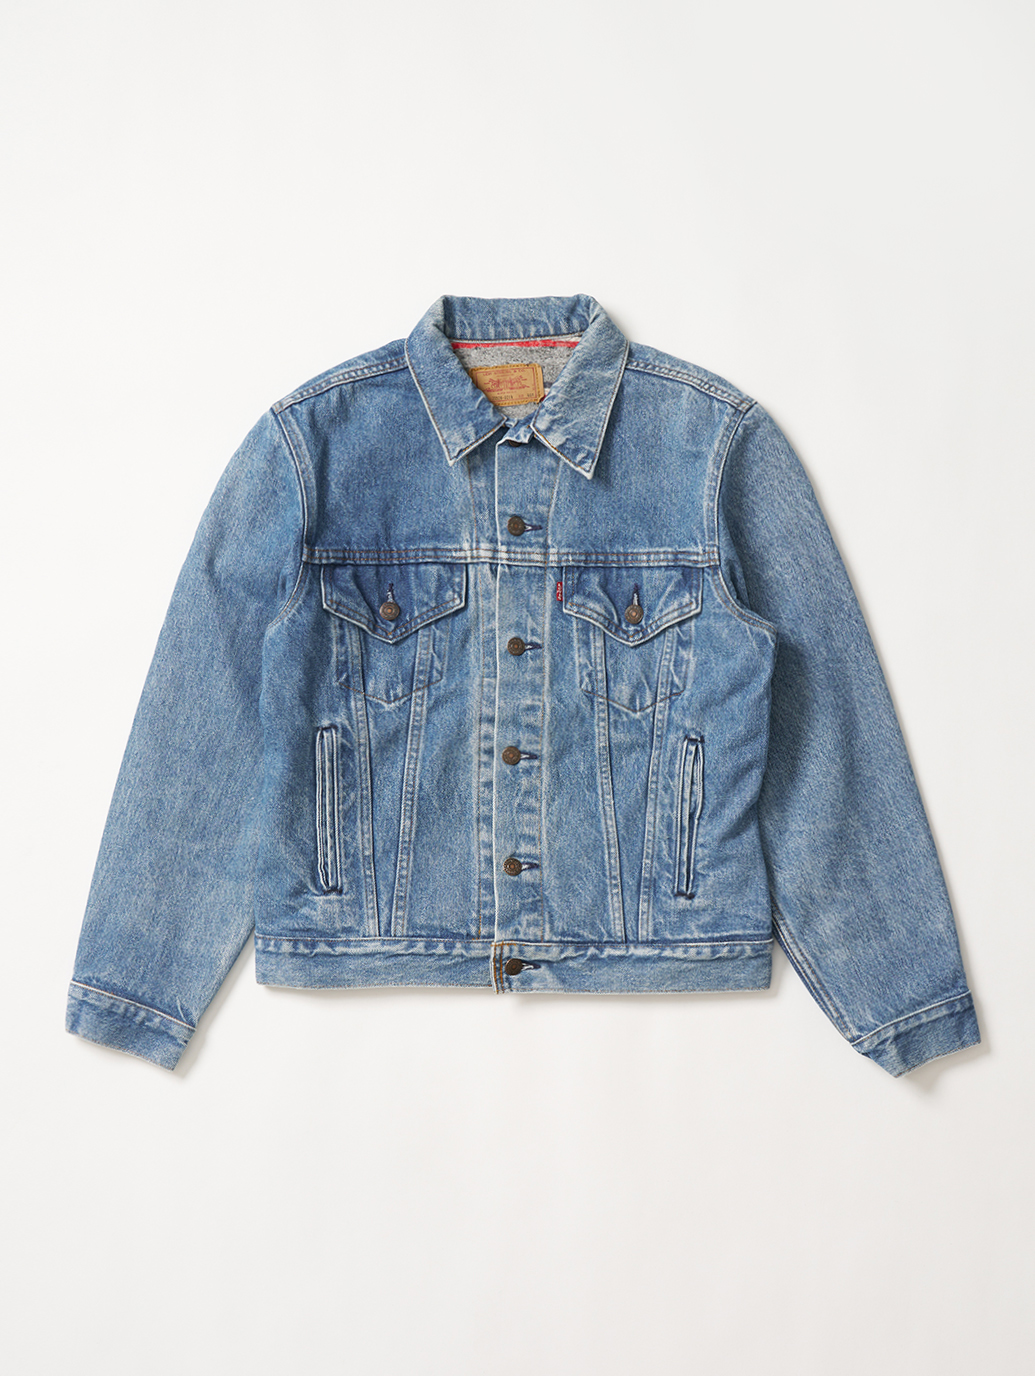 LEVI'S® AUTHORIZED VINTAGE MADE IN THE USA フランネルトラッカー ...